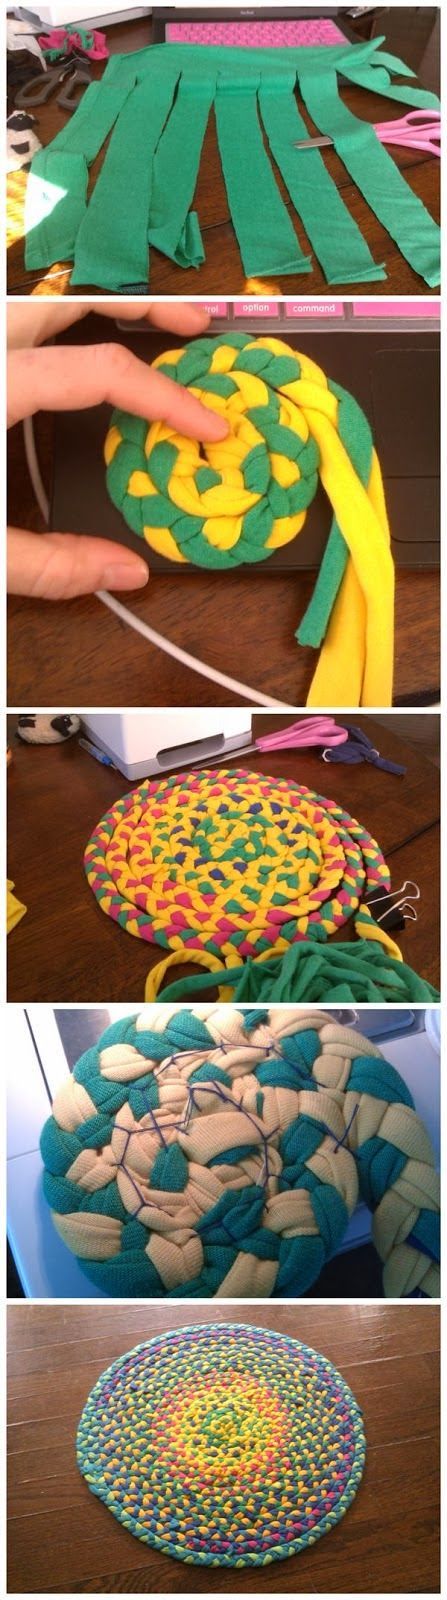 Step 1: Cut It -   How to make a braided rug by old t-shirt